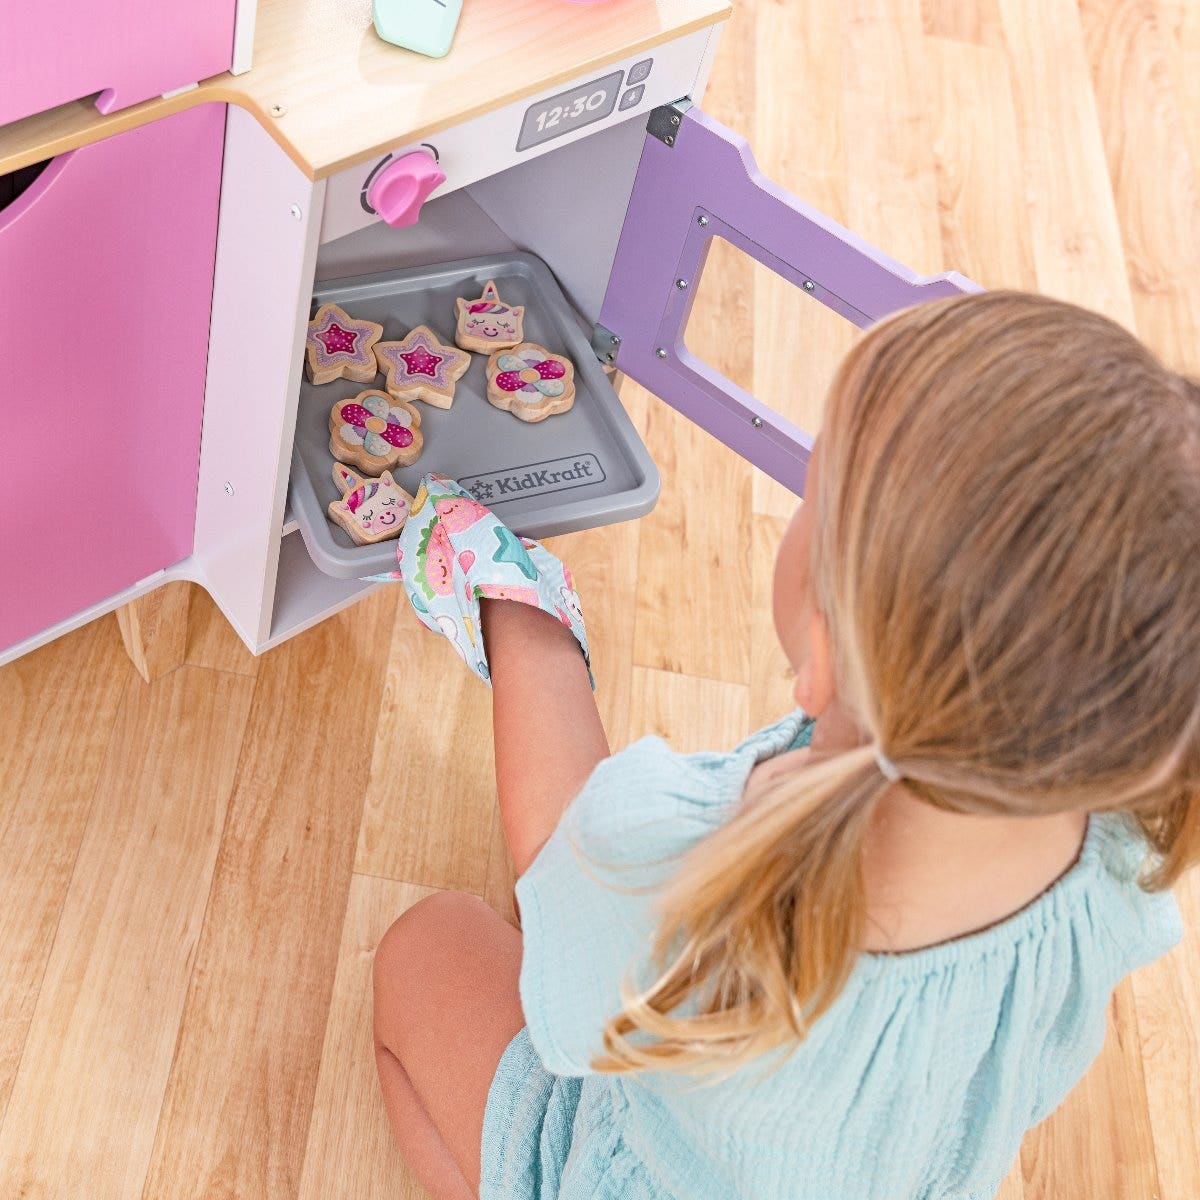 So Magical: Cutout cookies and baking pan included for kids to have starry-eyed cooking fun.
